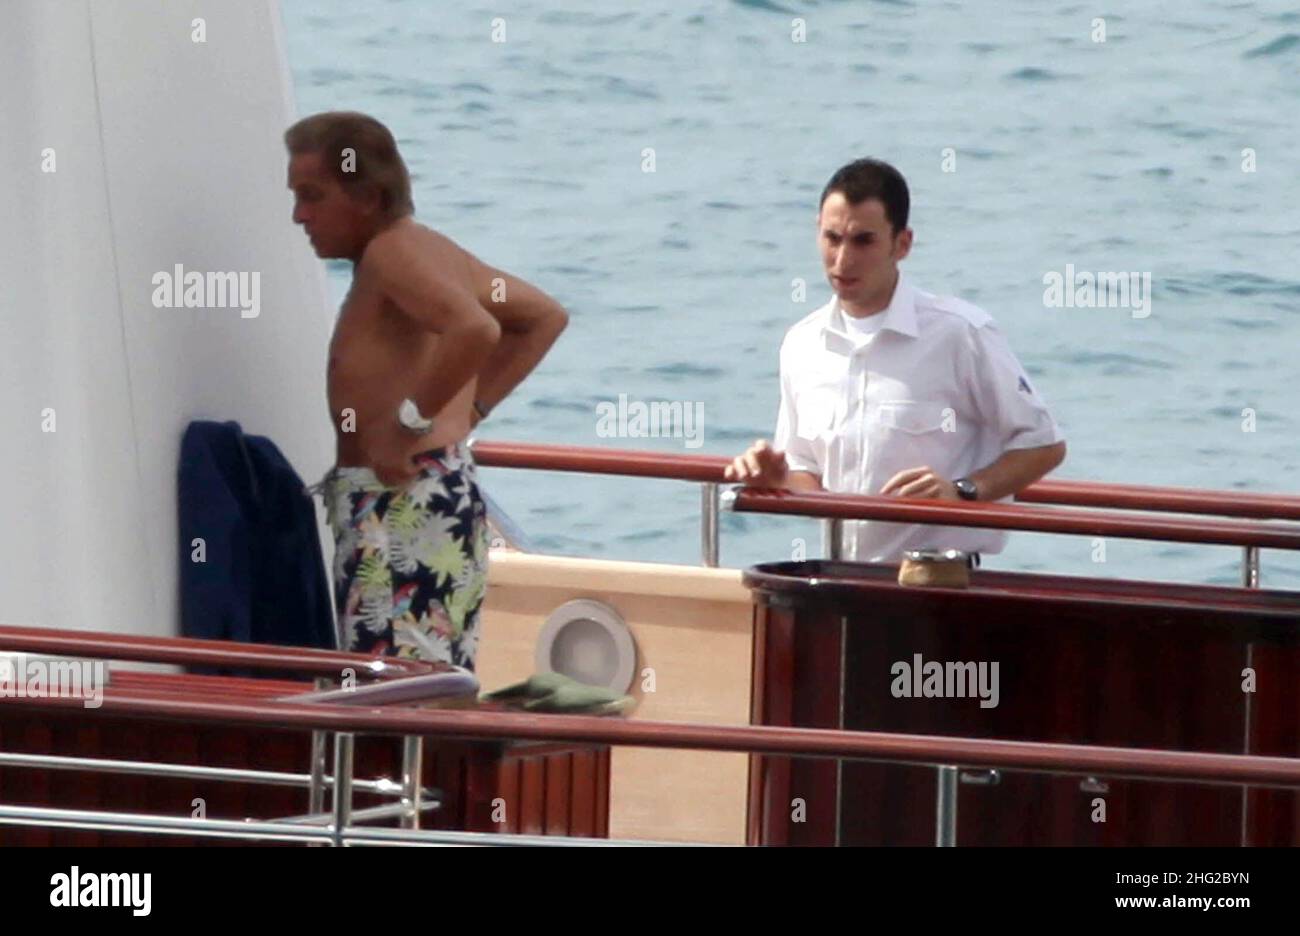 EXCLUSIVE PICTURES. Italian stylist Valentino on his yacht with a friend in Porto Santo Stefano, Tuscany, Italy. Stock Photo